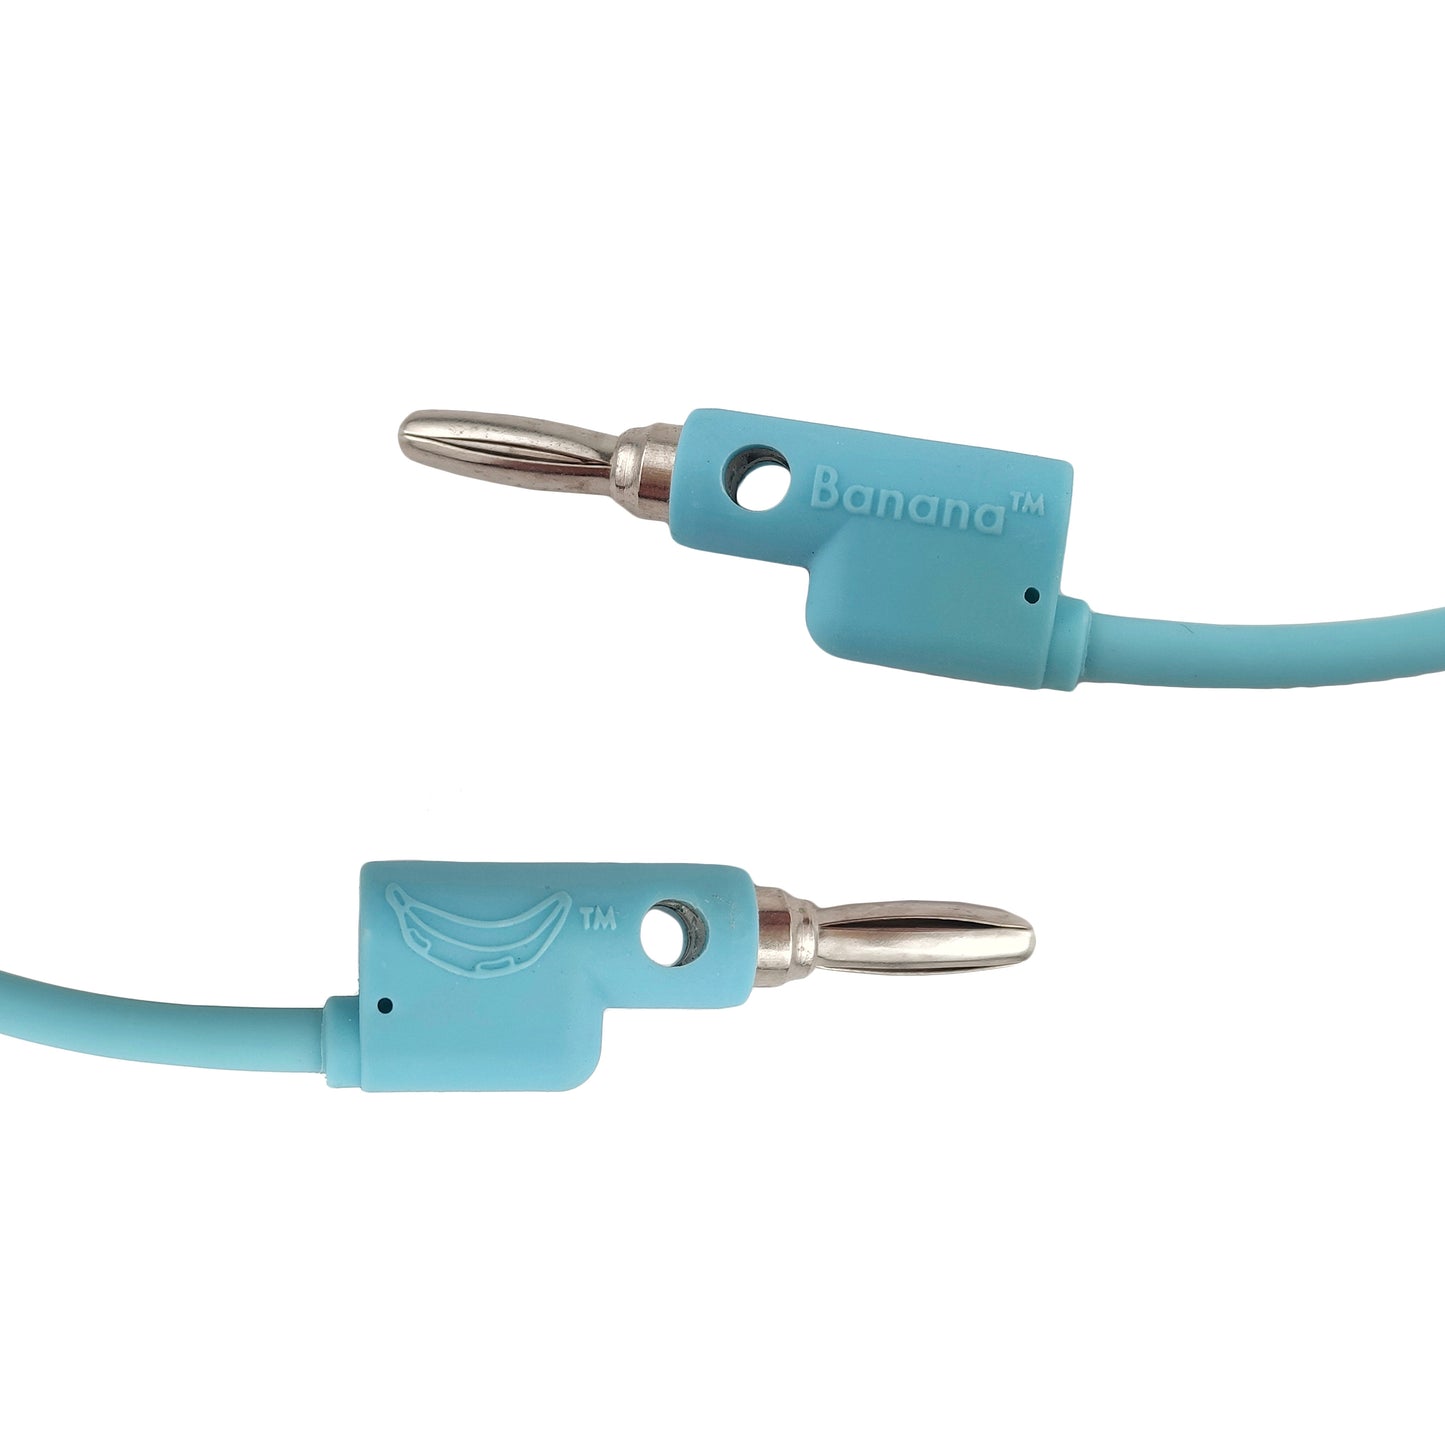 Ciat-Lonbarde Deerhorn Angle Patch Cables (11 Pack)